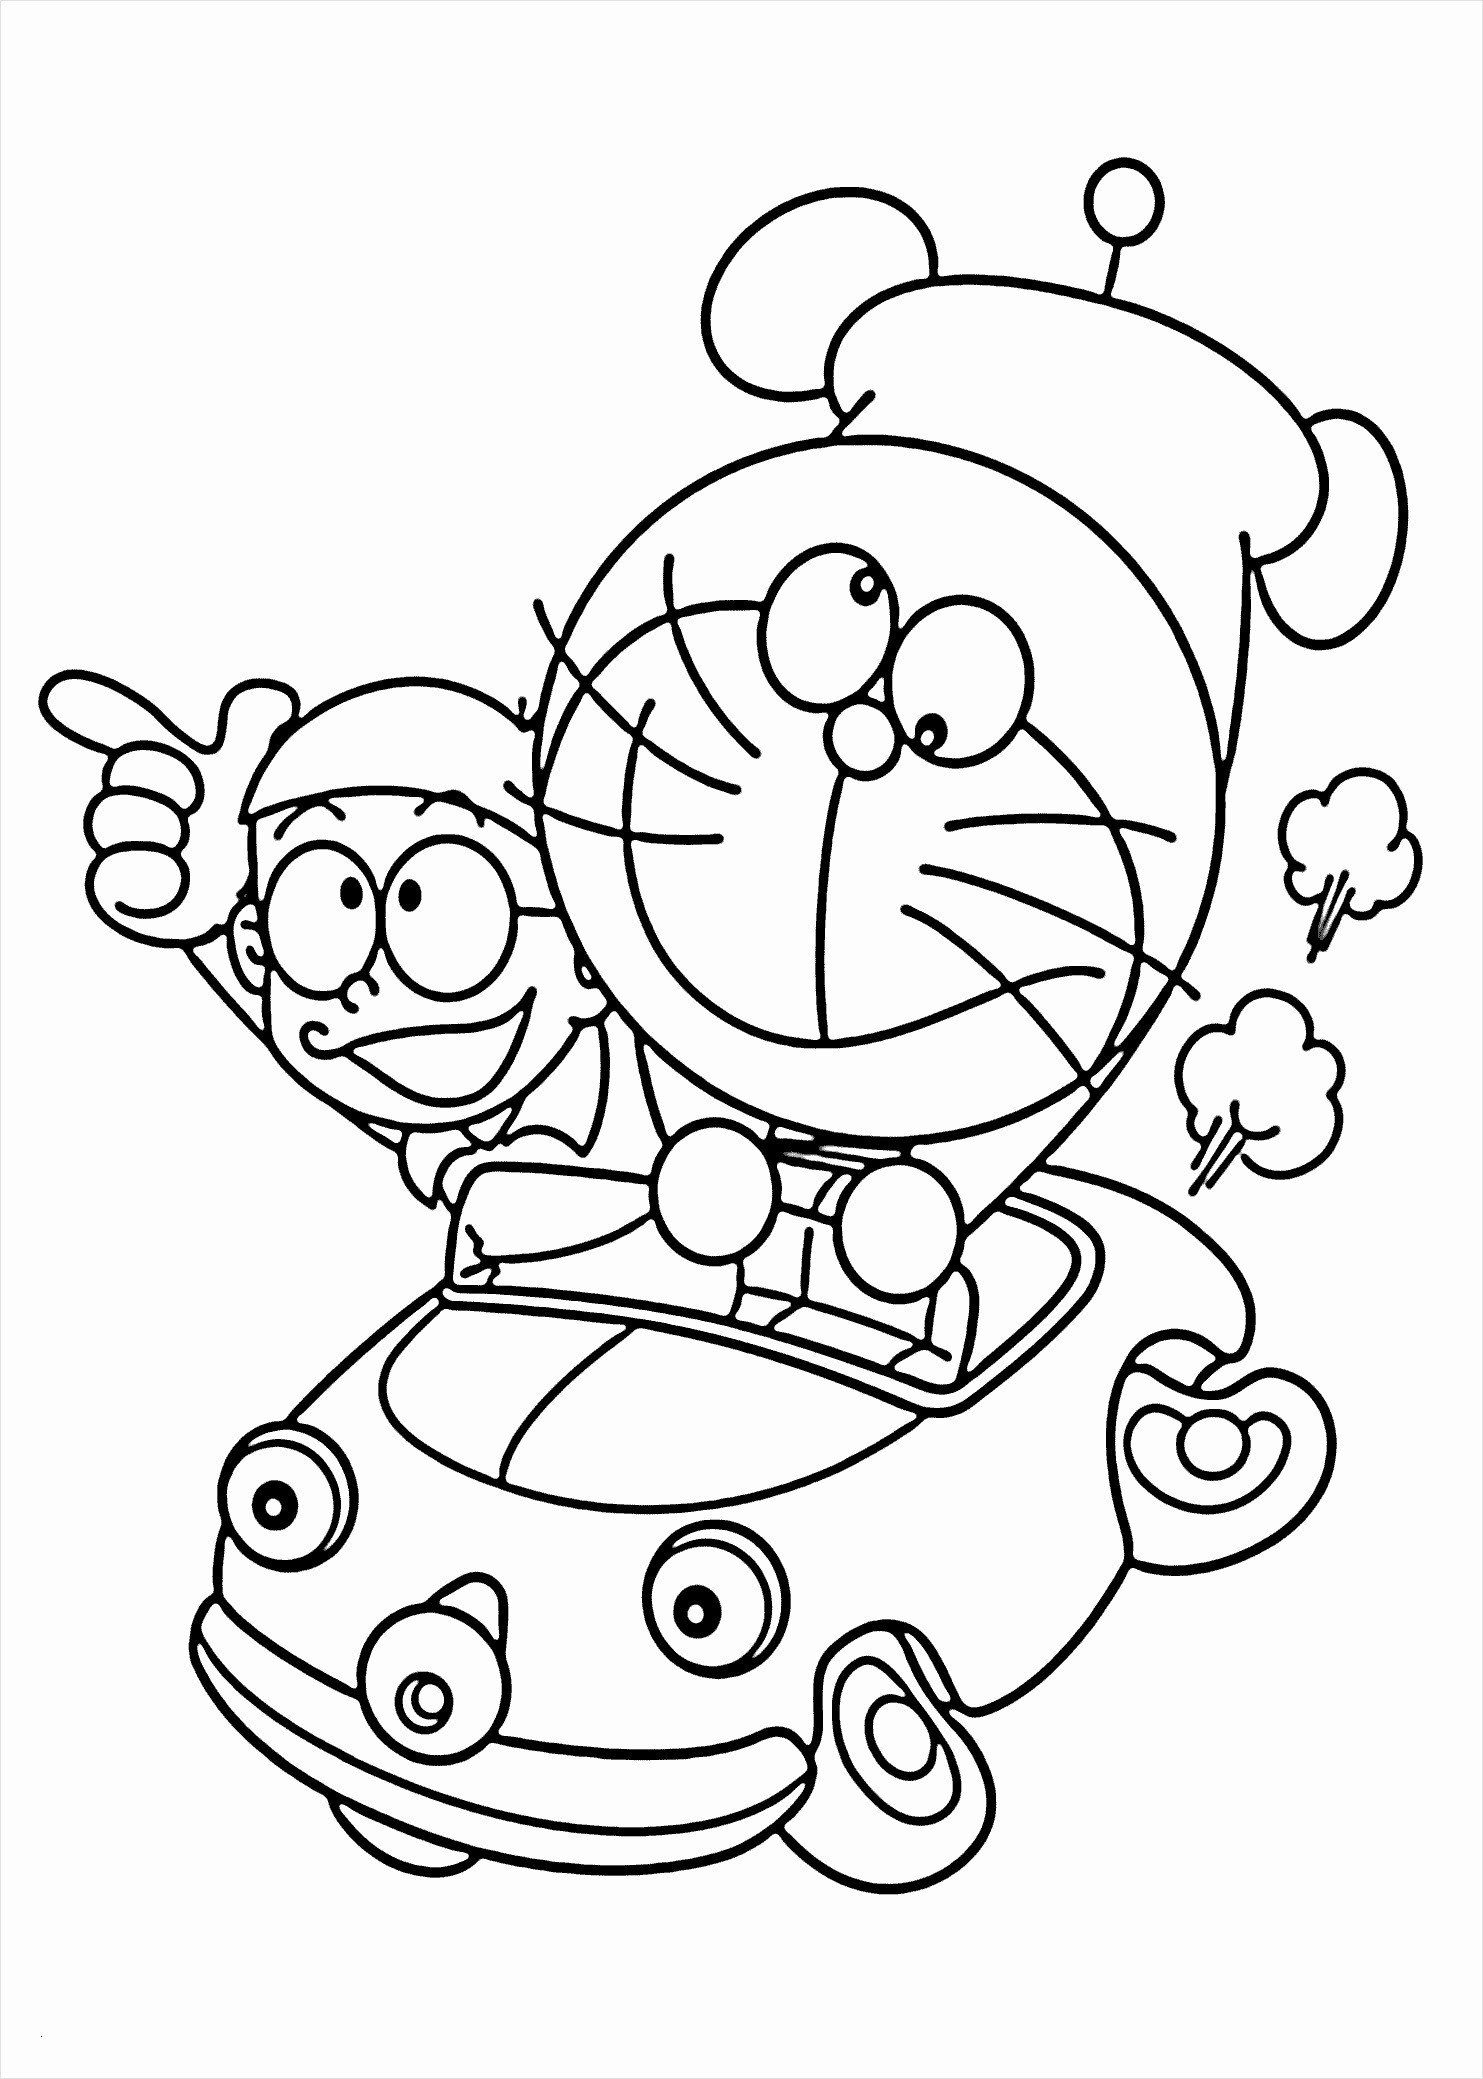 30 Lovable Teddy Bear Vase 2024 free download teddy bear vase of teddy bear coloring pages for adults simple adult coloring pages pertaining to teddy bear coloring pages for adults teddy bear coloring page unique fabulous teddybear colo